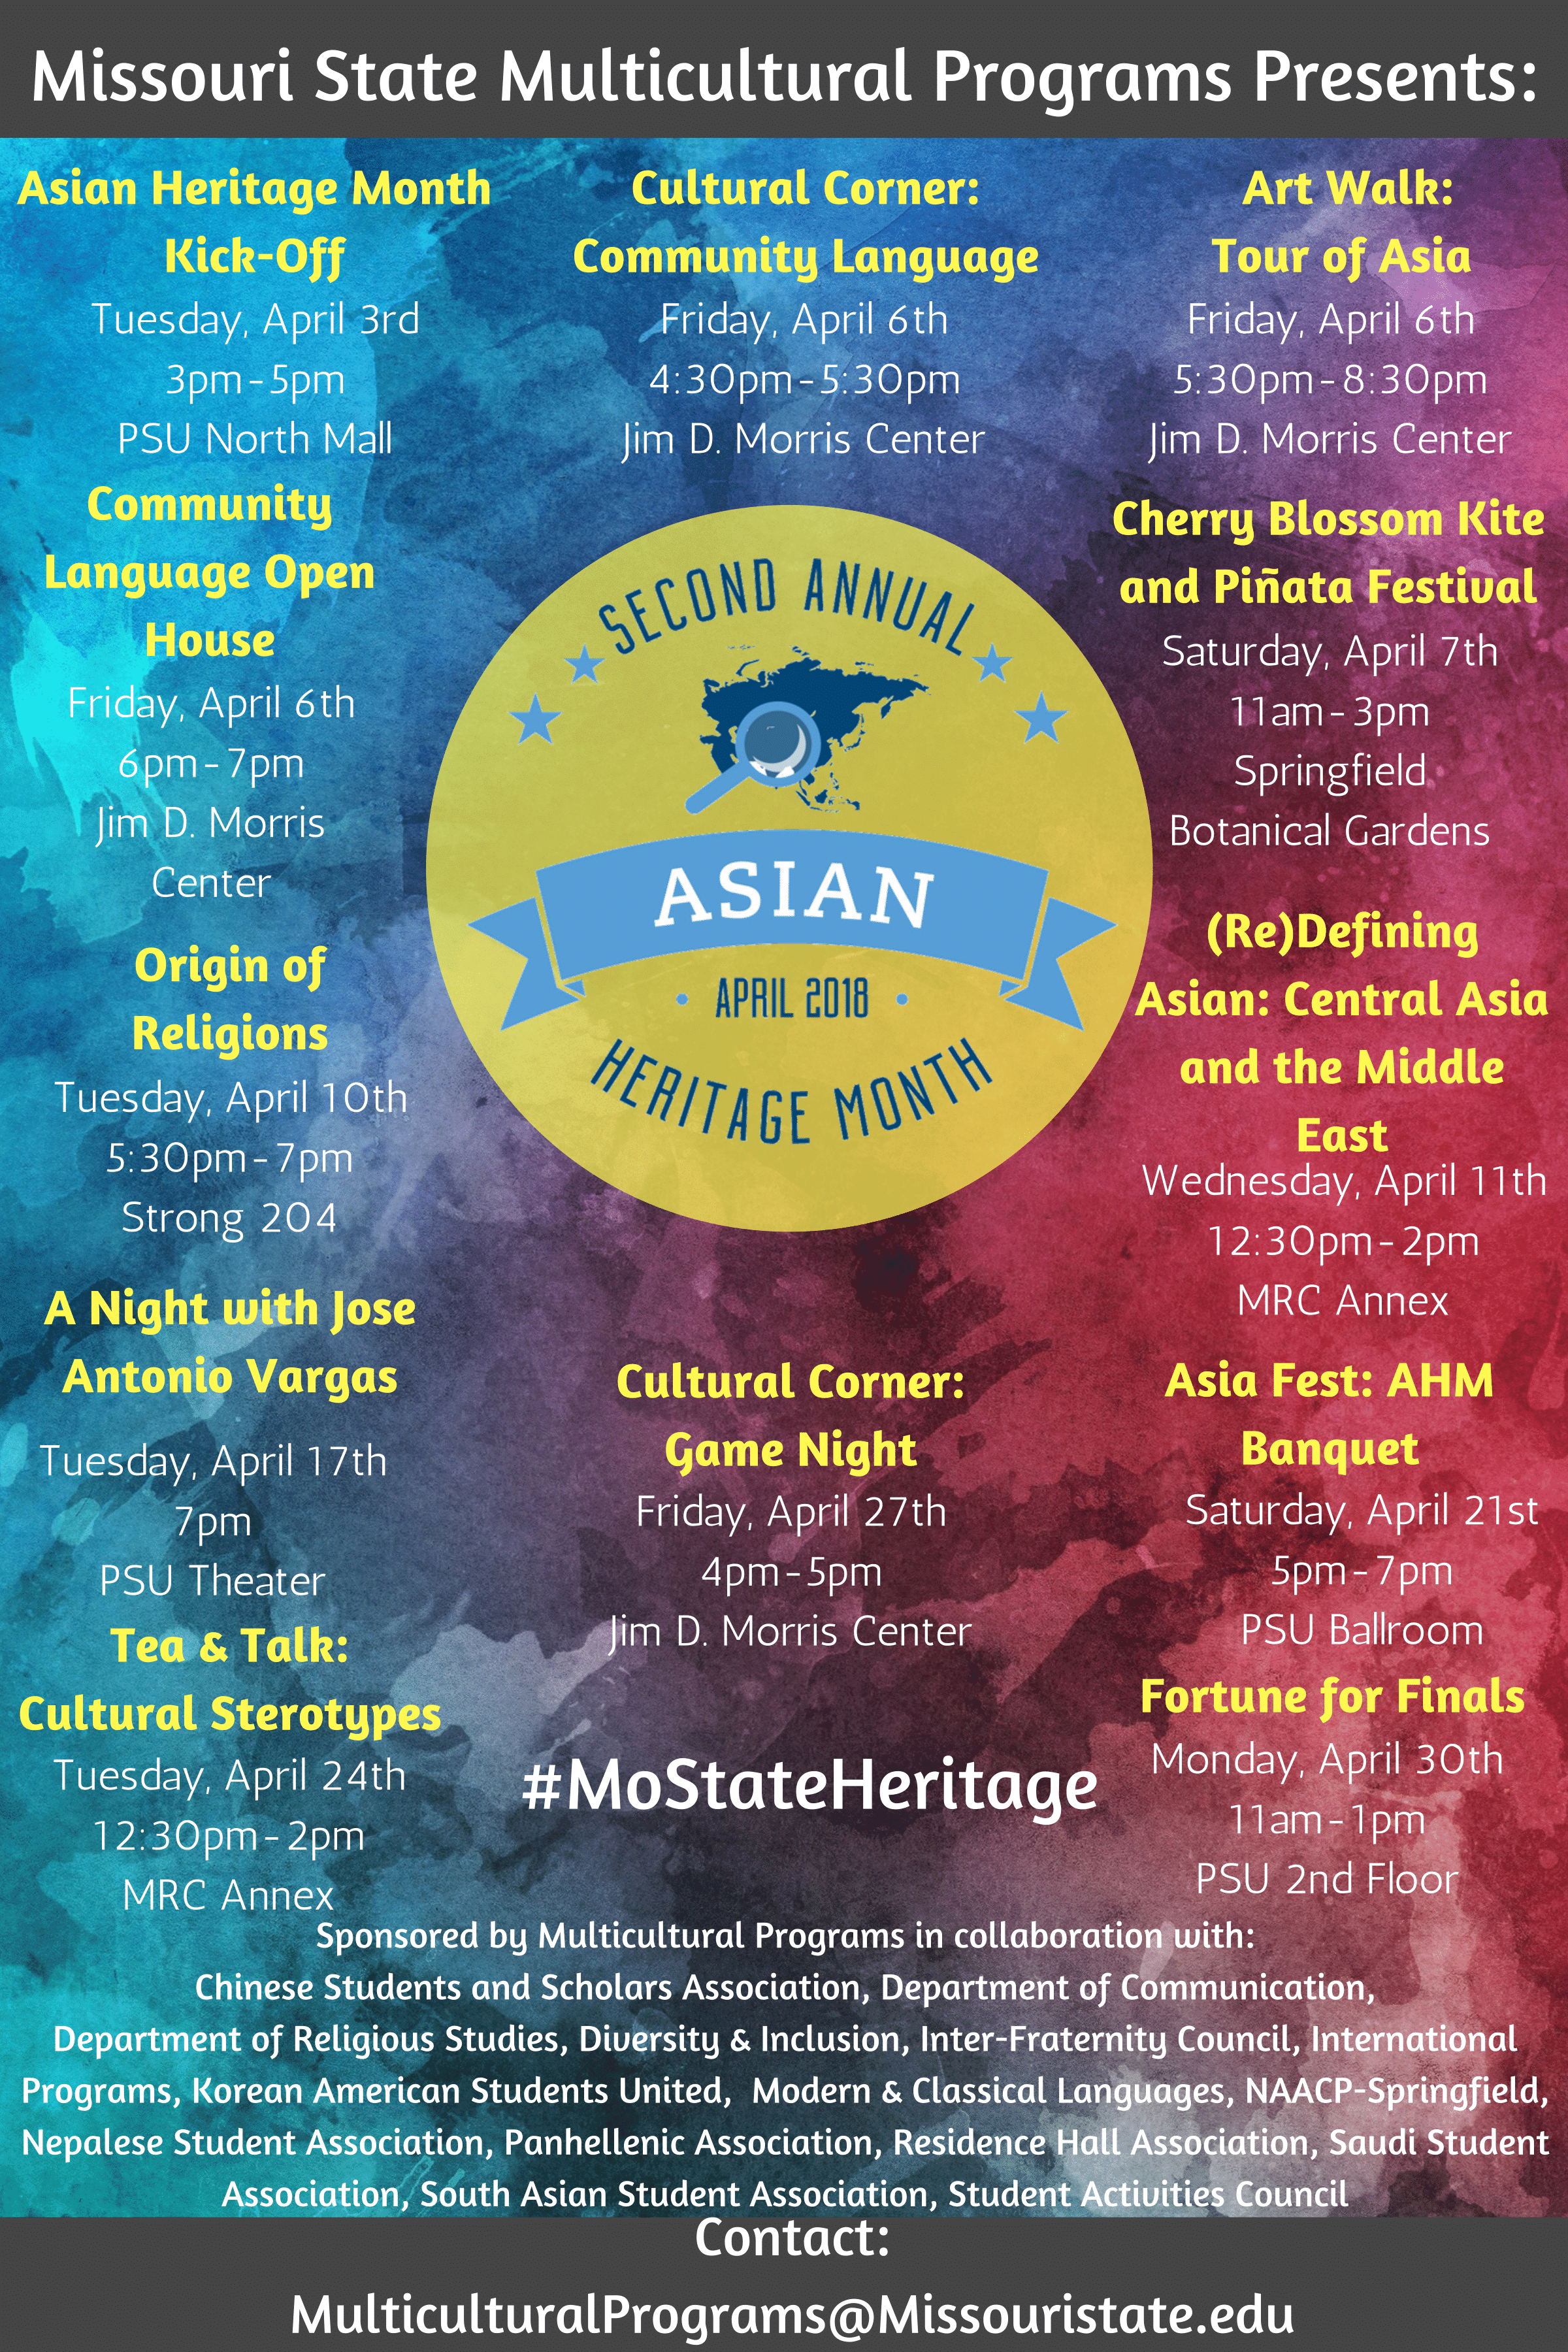 Asian Heritage Month 2018